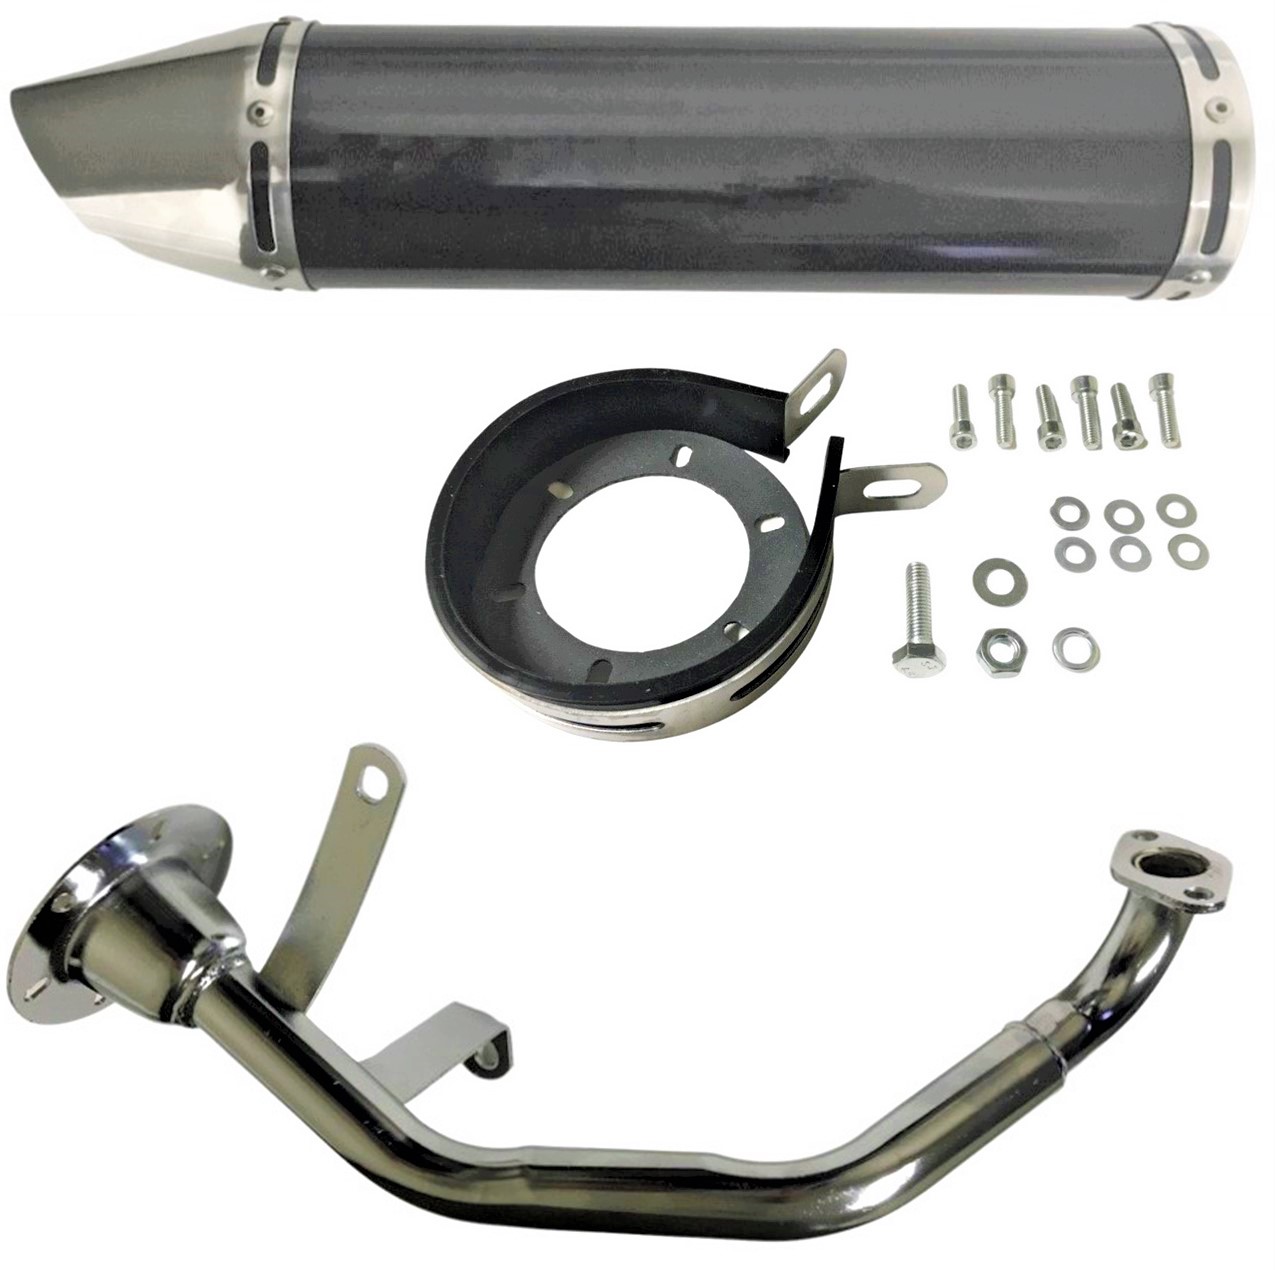 Exhaust Pipe HIGH PERFORMANCE - BLACK/CHROME Fits Most GY6-125, GY6-150 Chinese Scooters Canister L=44cm 17.50in. OD=10cm 4.0in - Click Image to Close